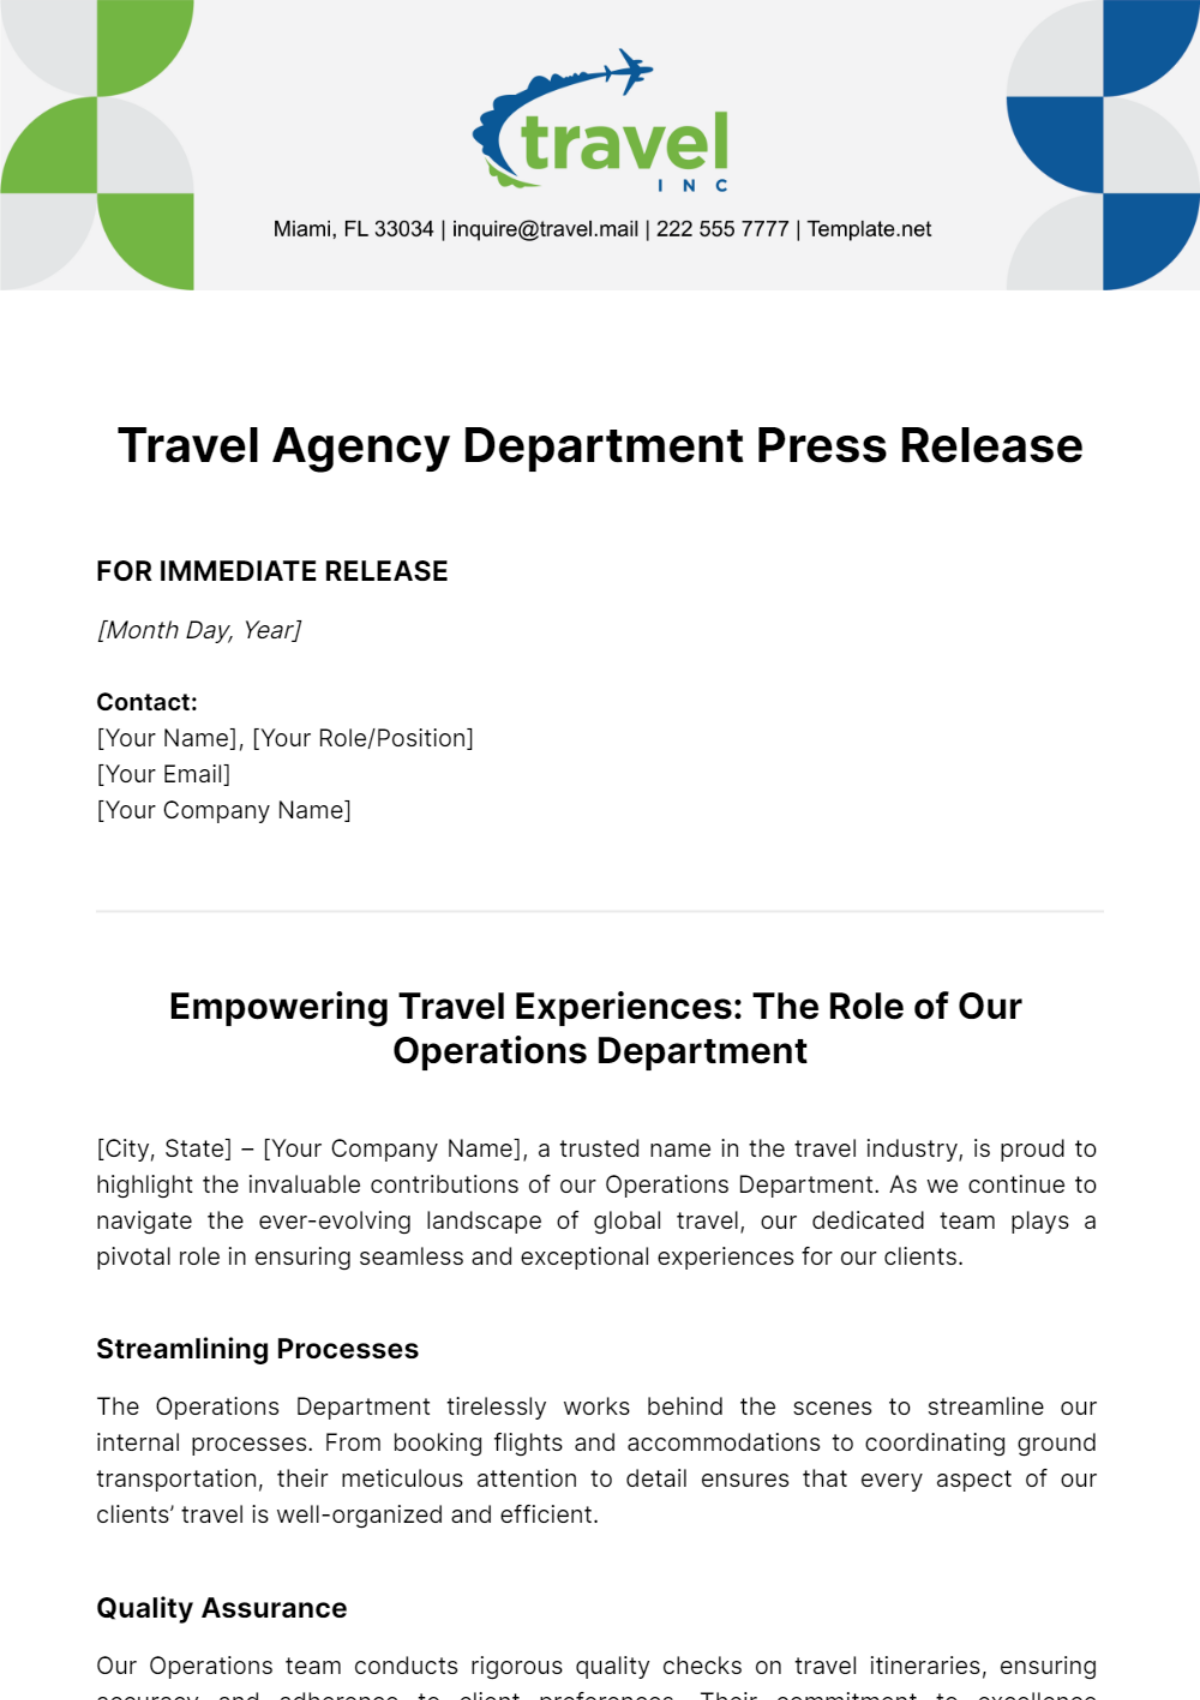 Free Travel Agency Department Press Release Template